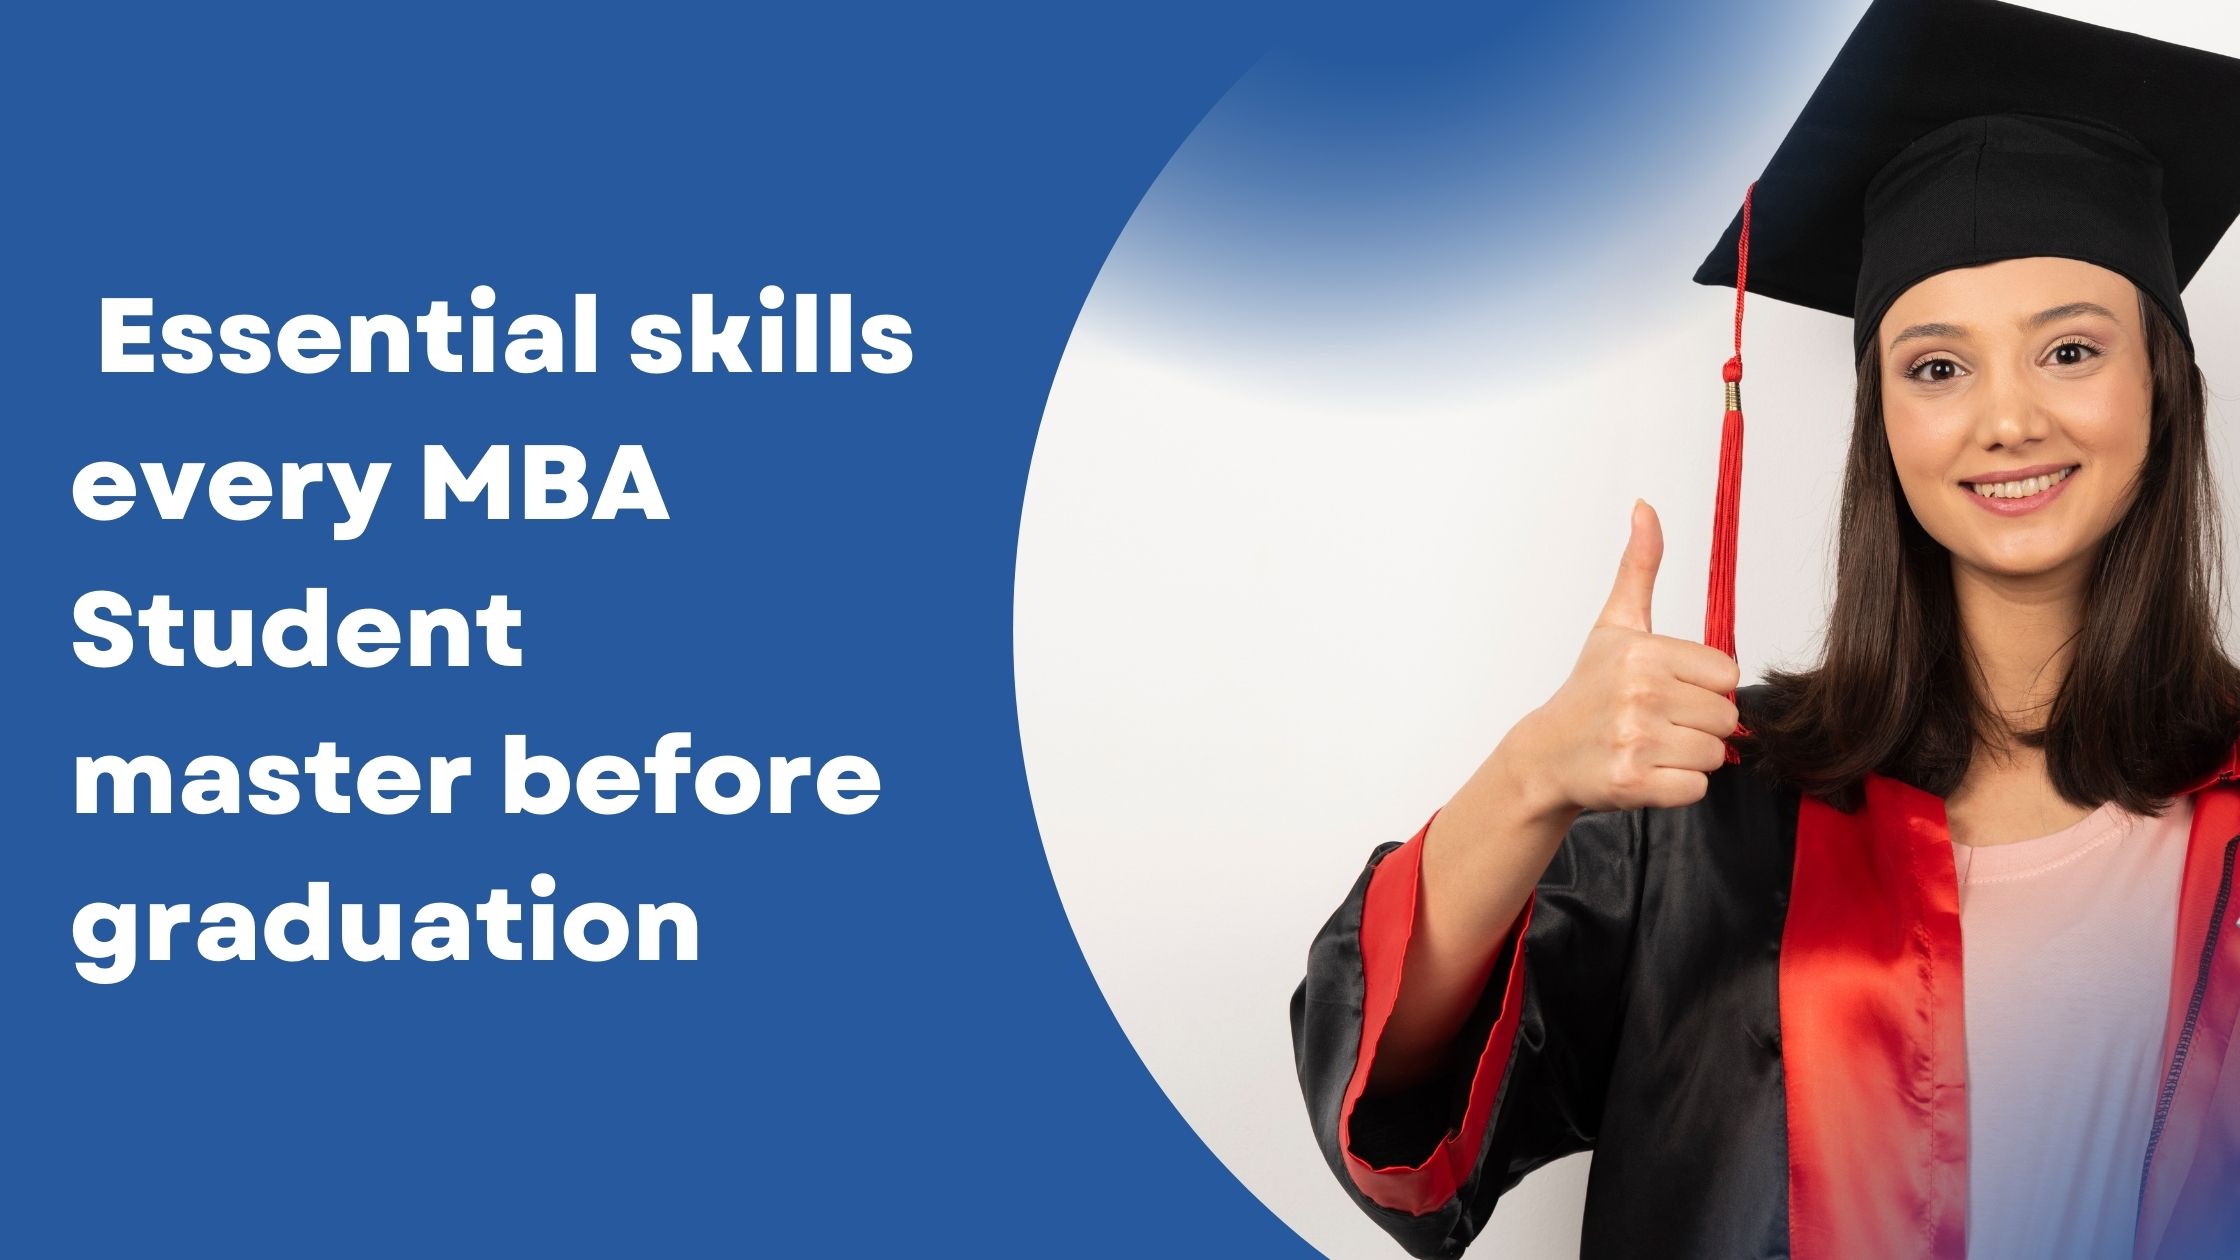 Essential skills every MBA Student master before graduation